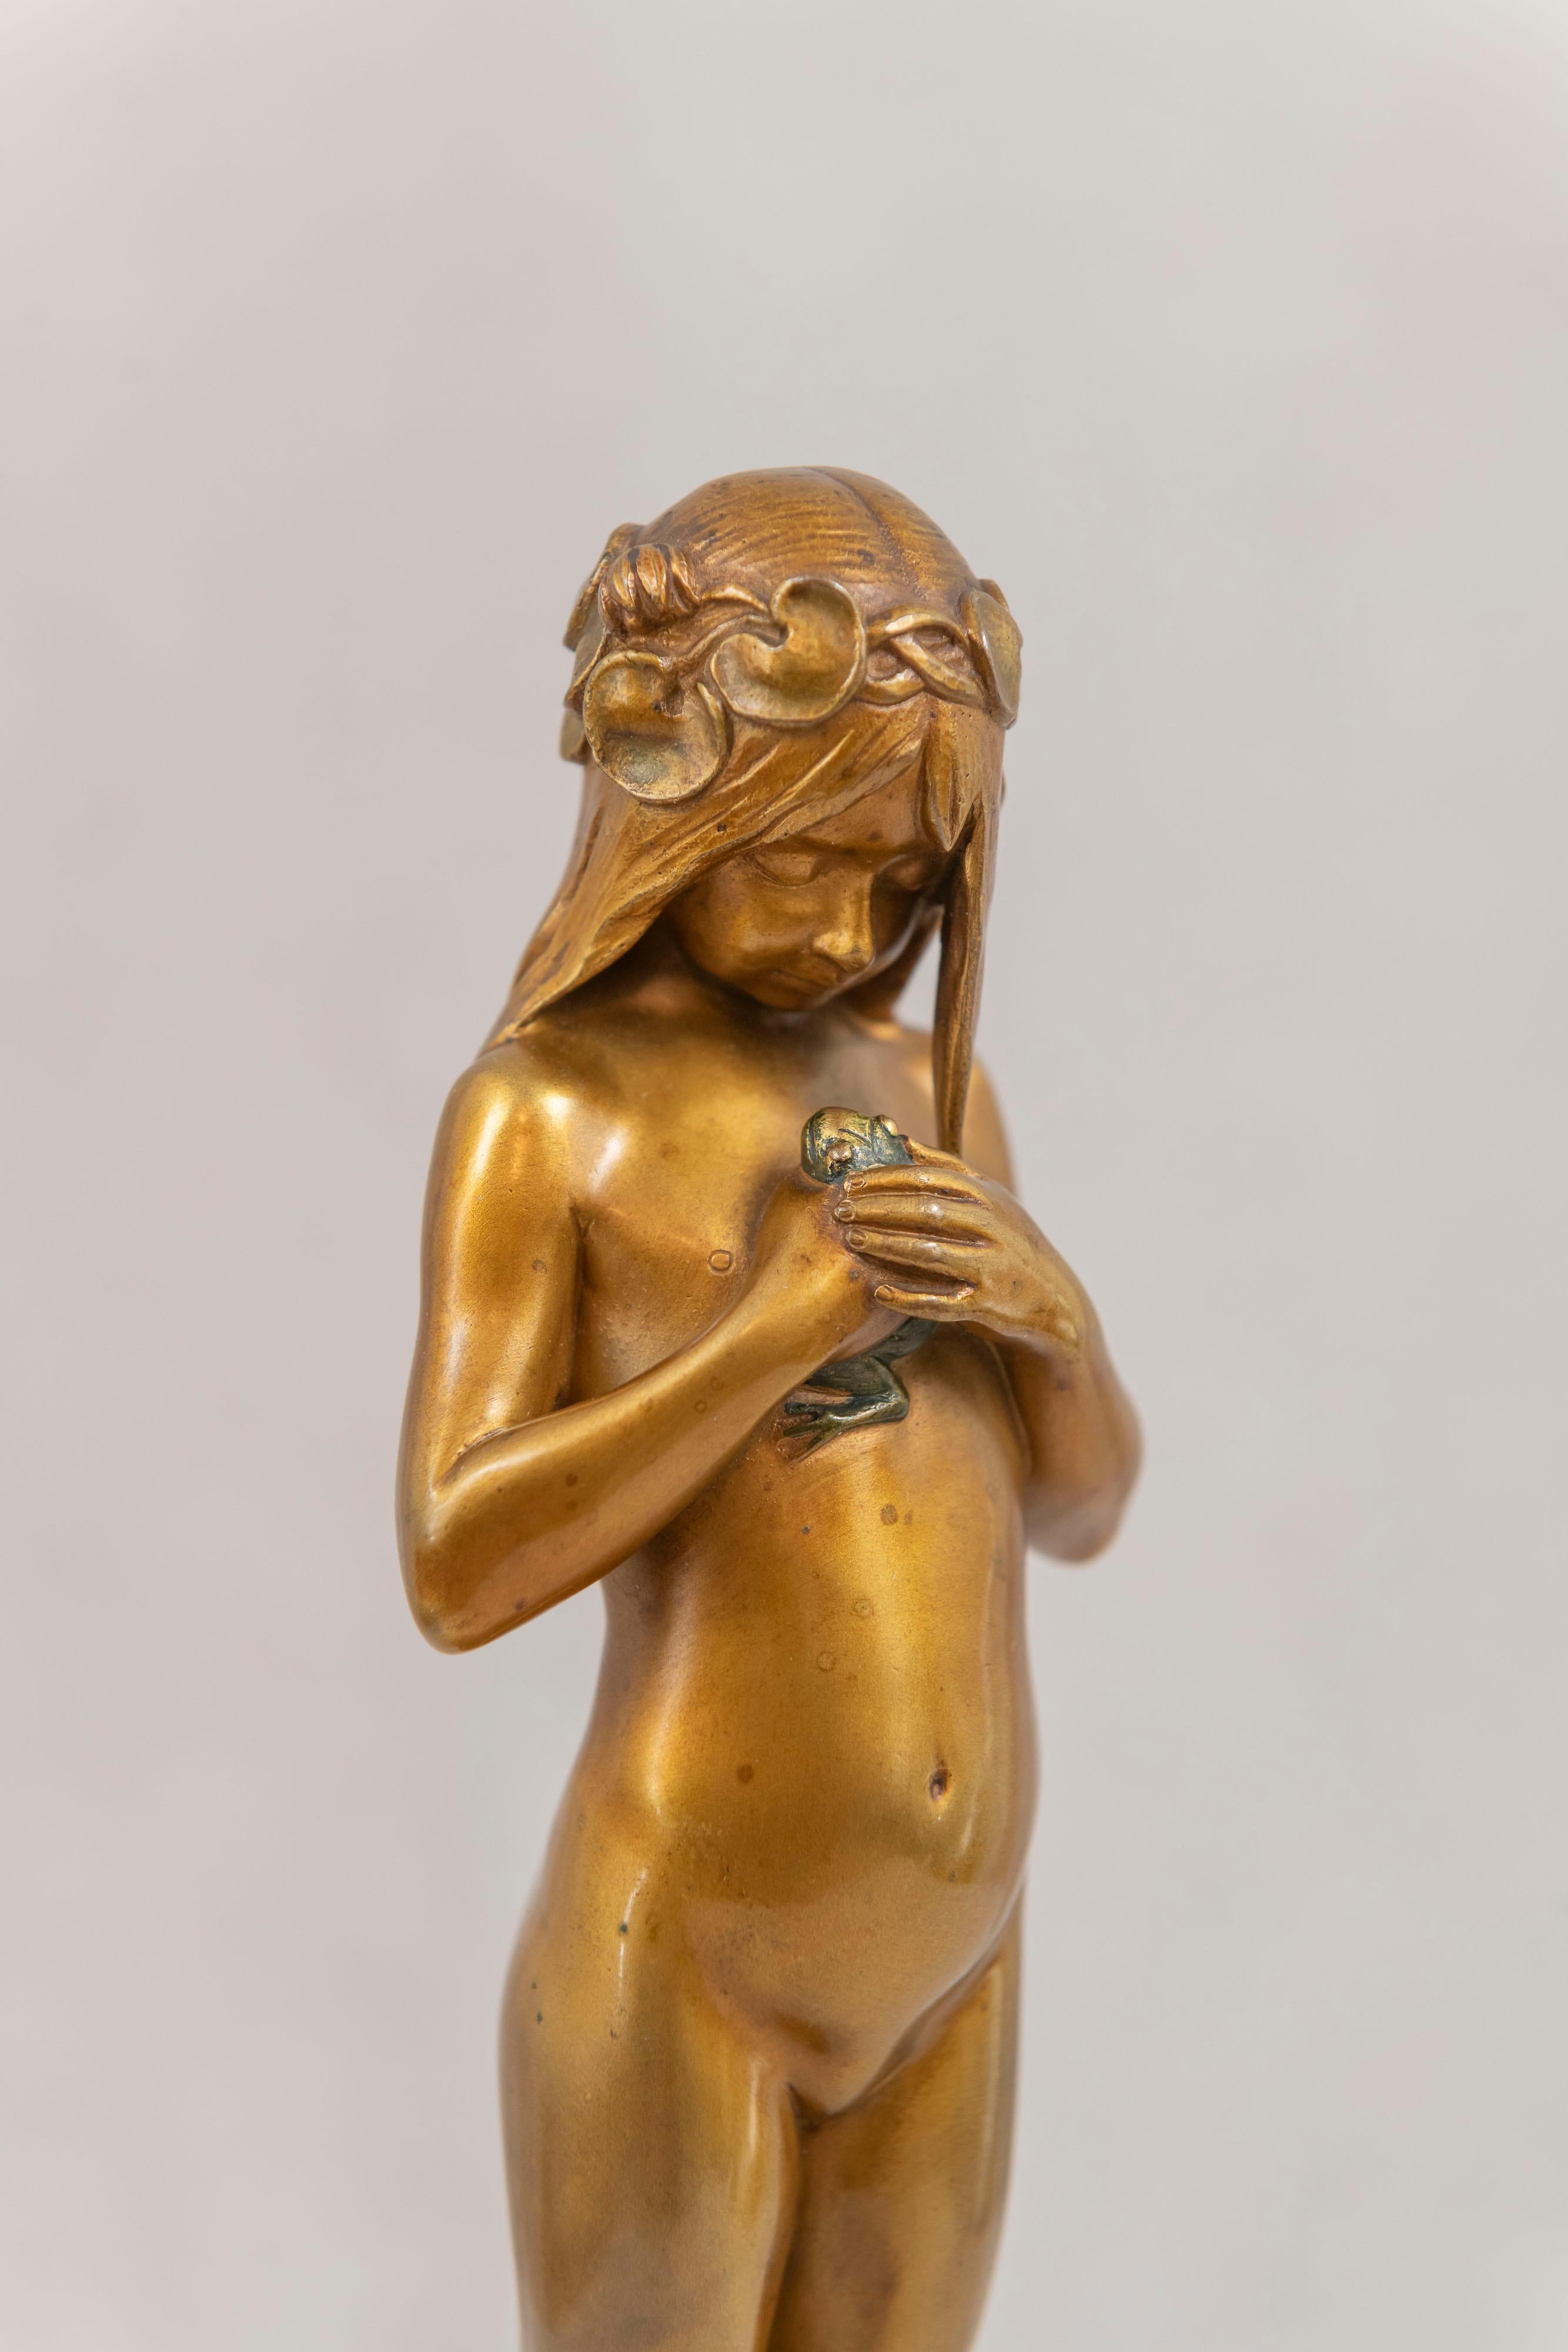 This beautiful little nude girl holding her pet frog is a joy to the eye and to the touch. Having her hair wrapped in flowers is a nice art nouveau touch. The gold patina is exceptional and brings her to life. The frog just adds to the mystique of